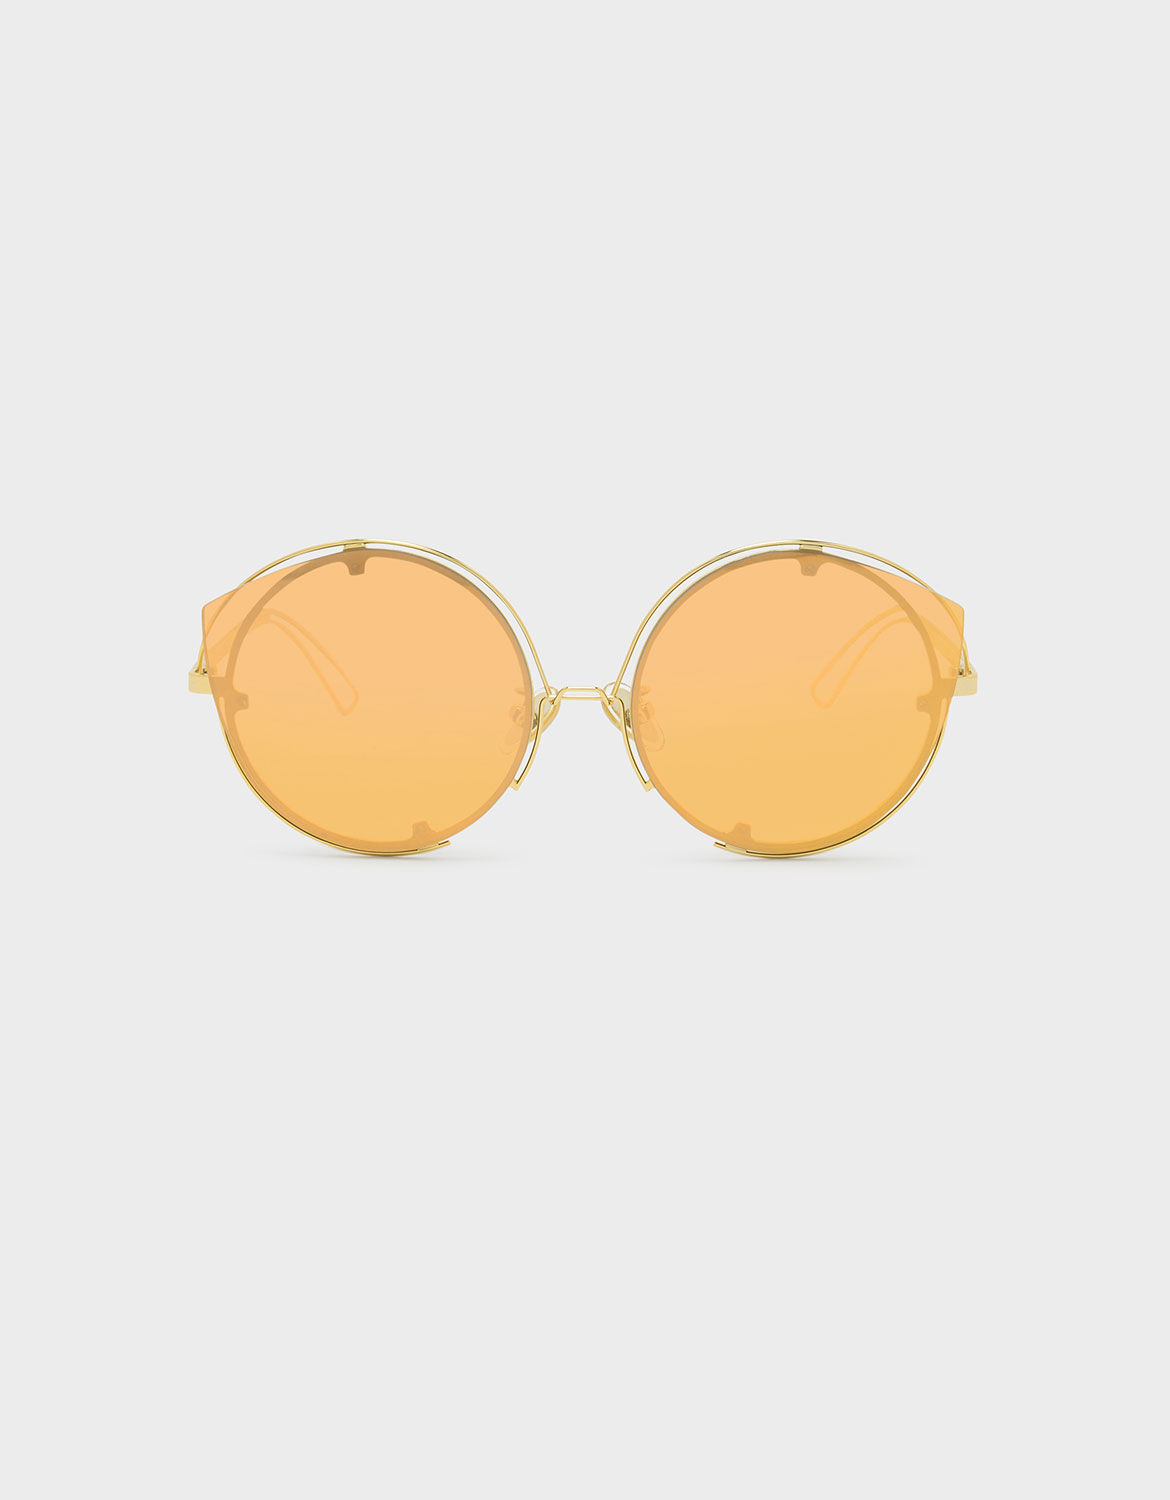 gold wire frame sunglasses